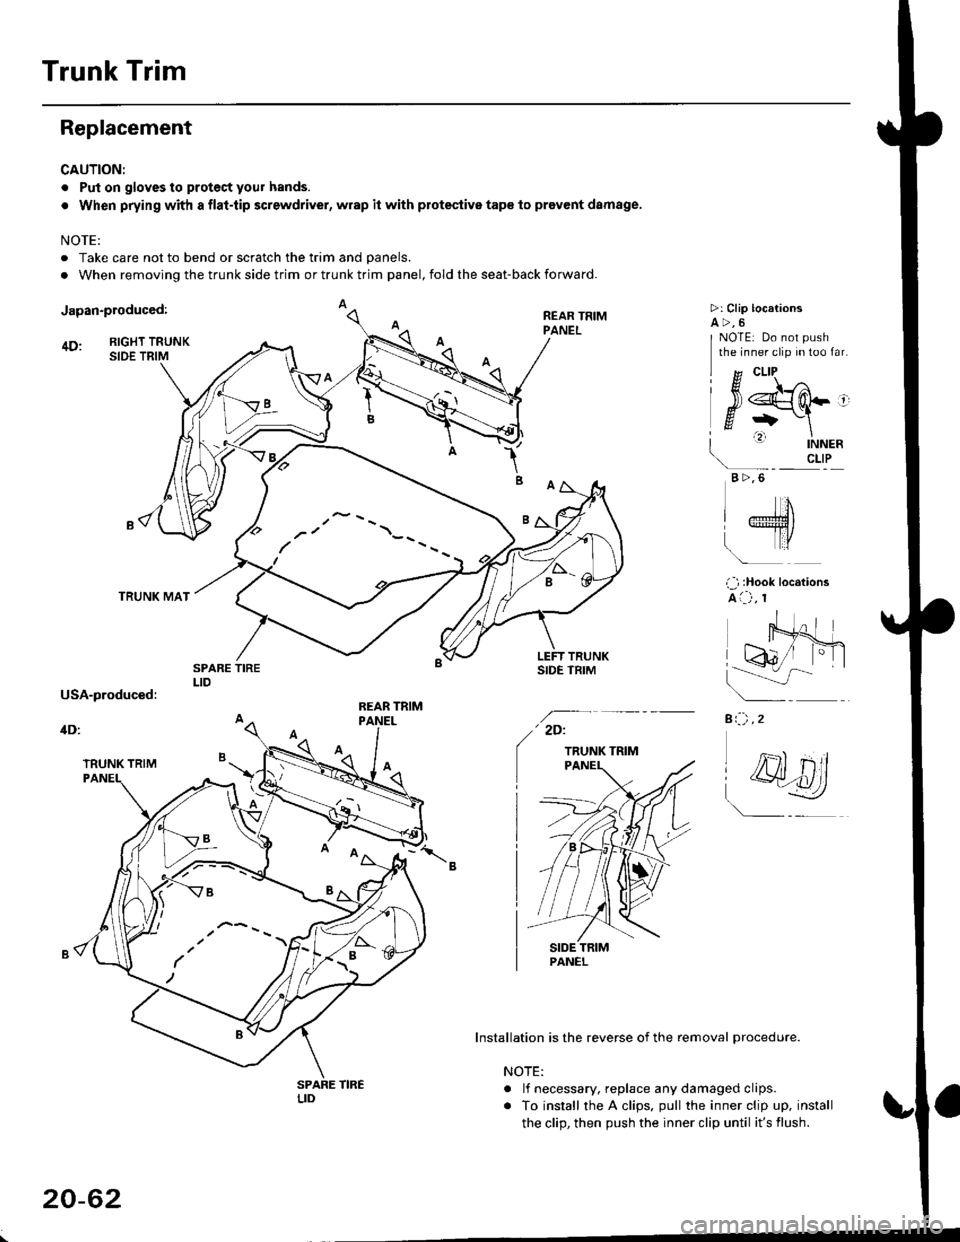 HONDA CIVIC 1997 6.G Workshop Manual Trunk Trim
Replacement
CAUTION:
. Put on gloves to proteci your hands.
. When prying with a flat-tip screwdriver, wrap it with protestive tap€ lo prevent damage.
NOTE:
. Take care not to bend or scr